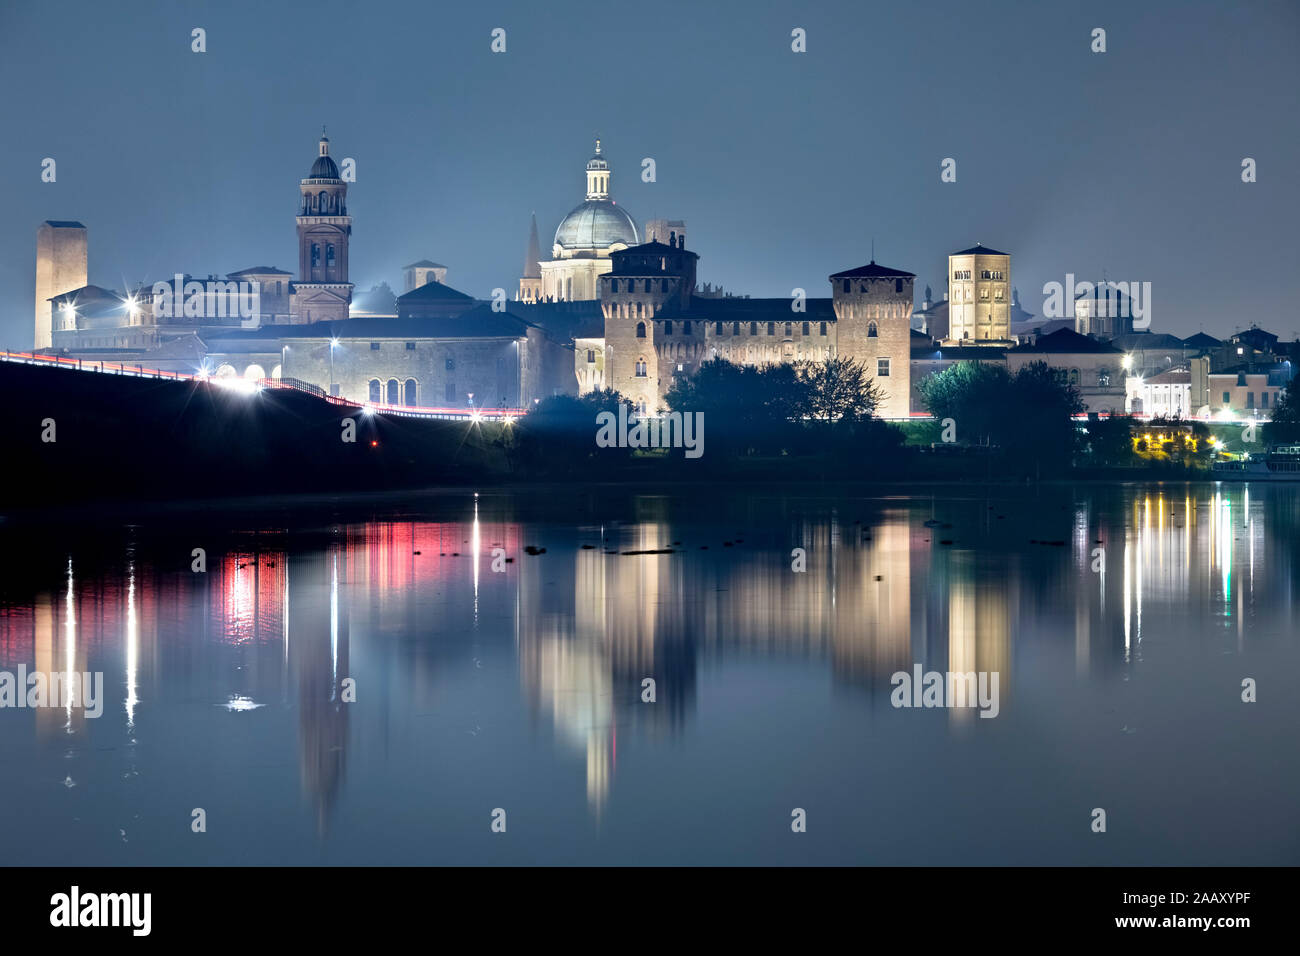 Mantova is reflected on the middle lake of the Mincio river. The city is one of the main centers of the Italian and European Renaissance. Italy. Stock Photo